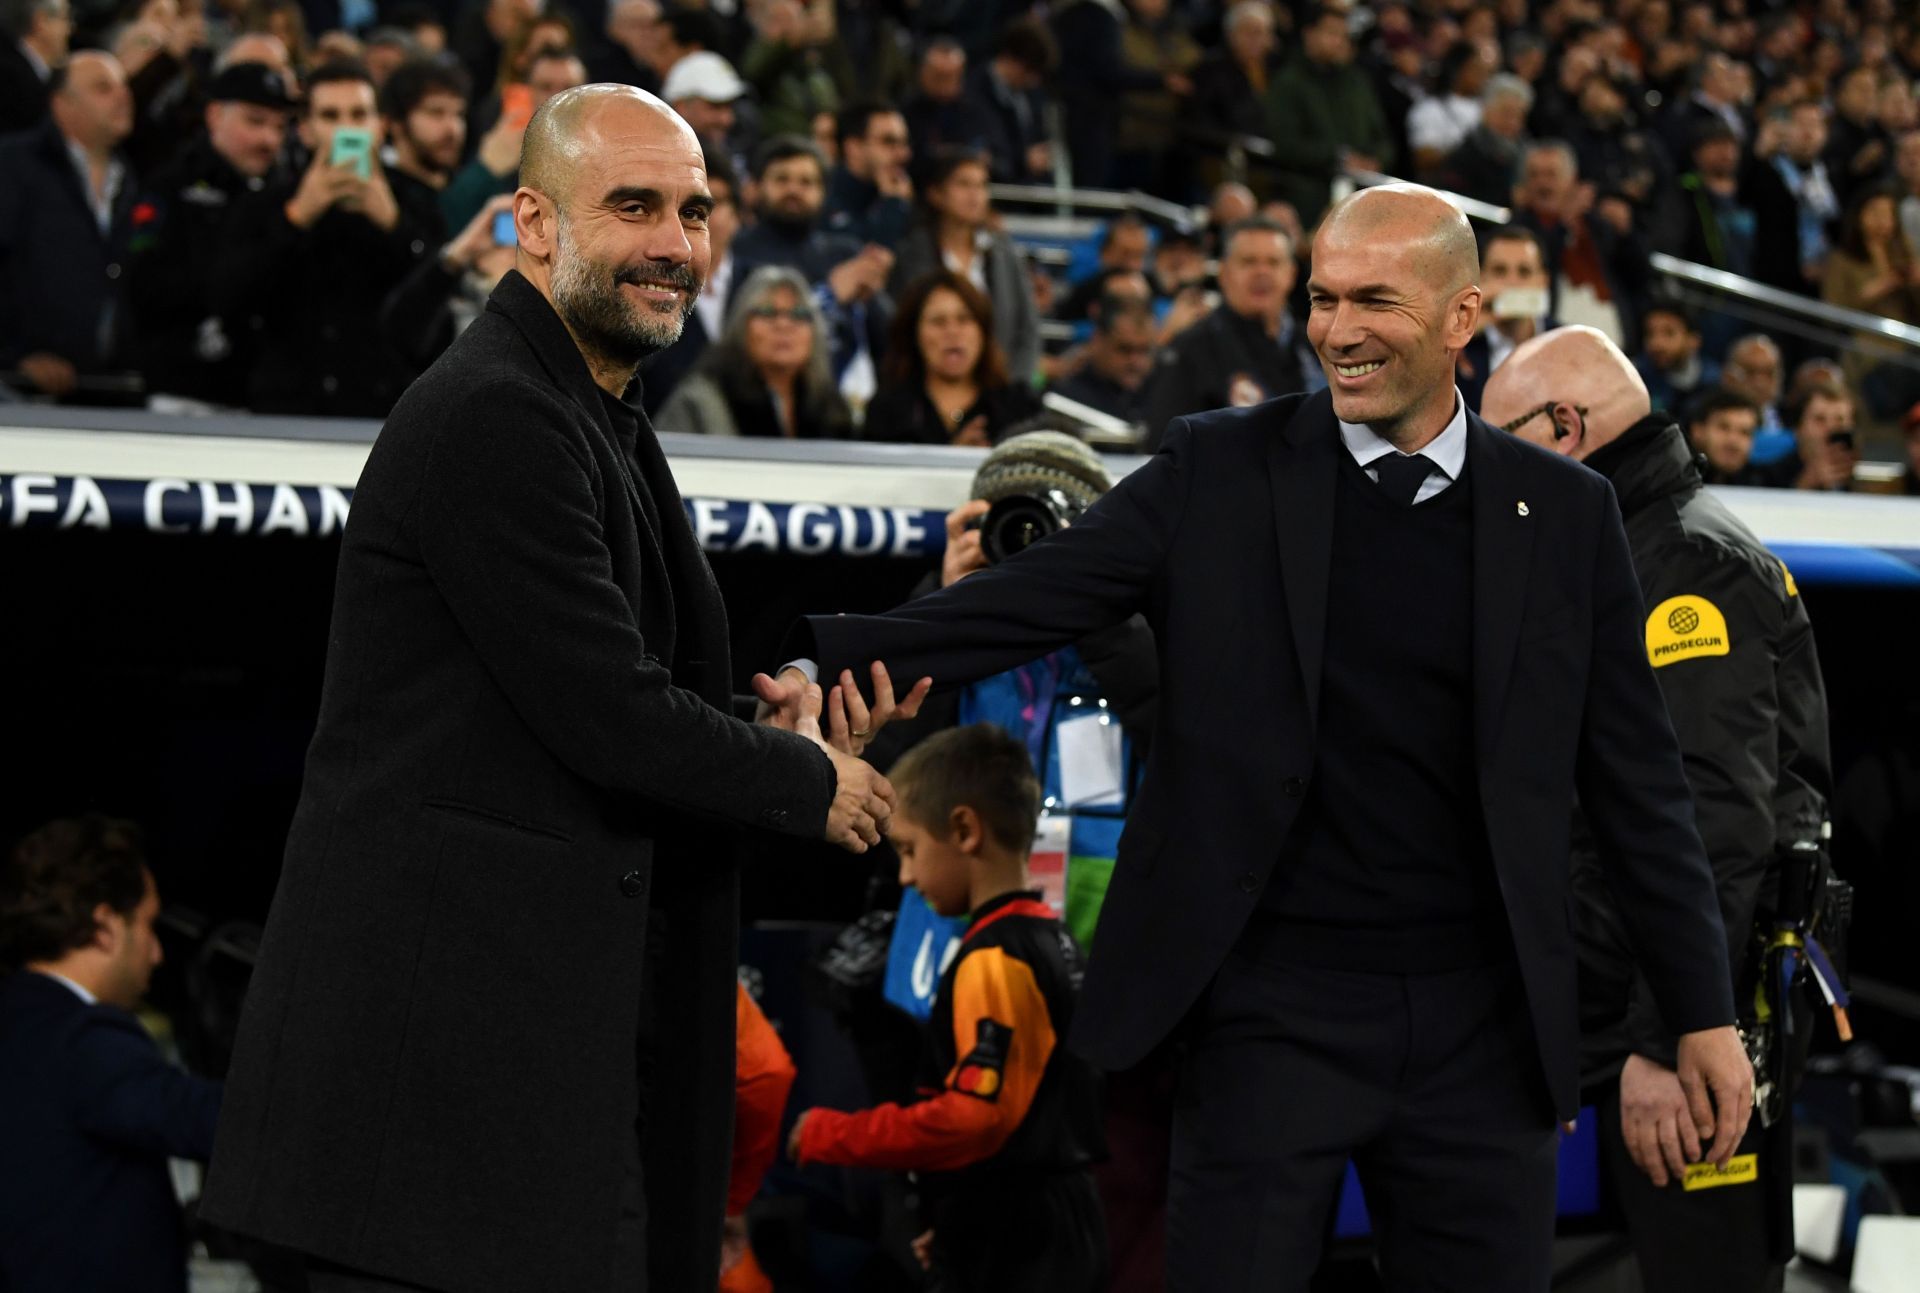 Zinedine Zidane (right) and Pep Guardiola (left) are among the best coaches in the world.